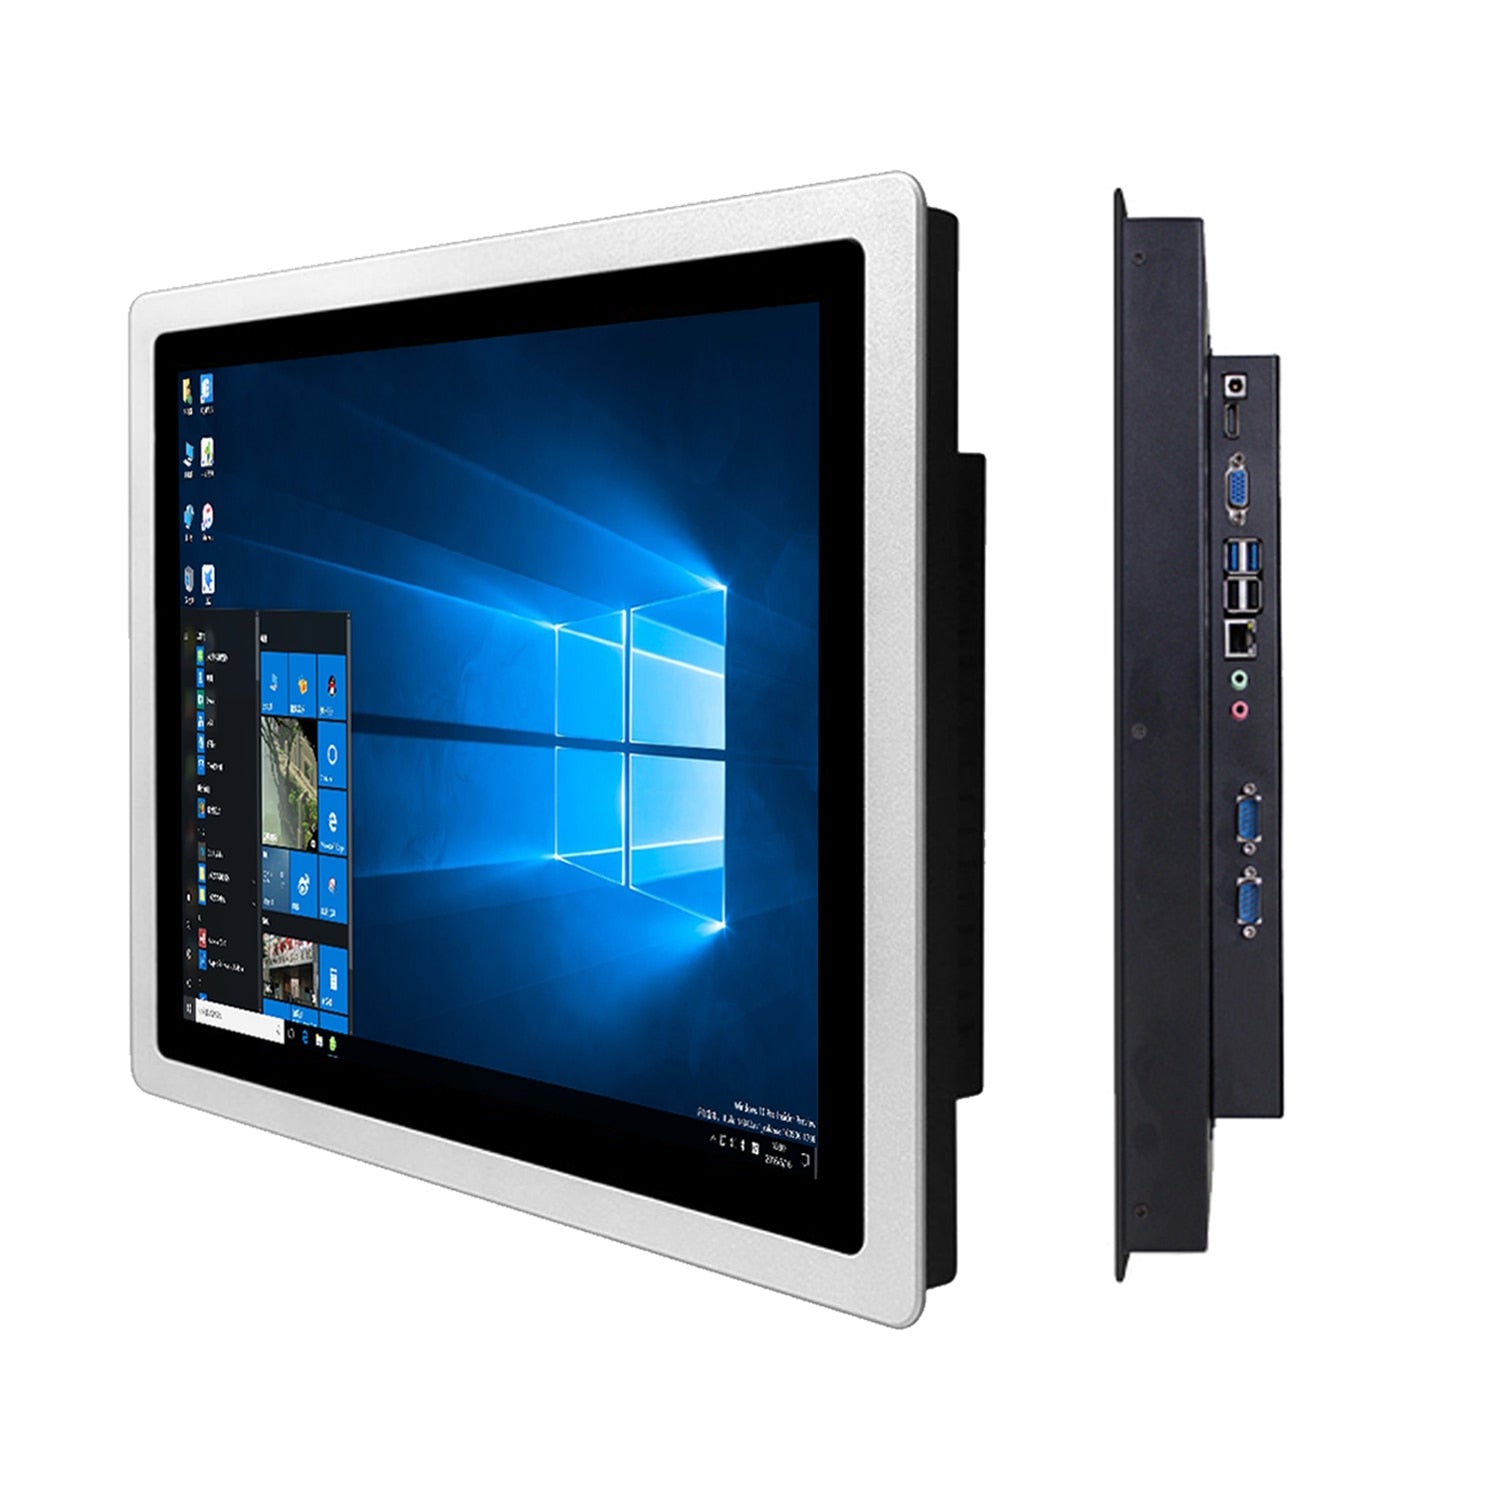 15 Inch Embedded Industrial All-in-one Tablet PC with Capacitive Touch Screen Core i3 Computer Built in WiFi 1024*768 for Win10